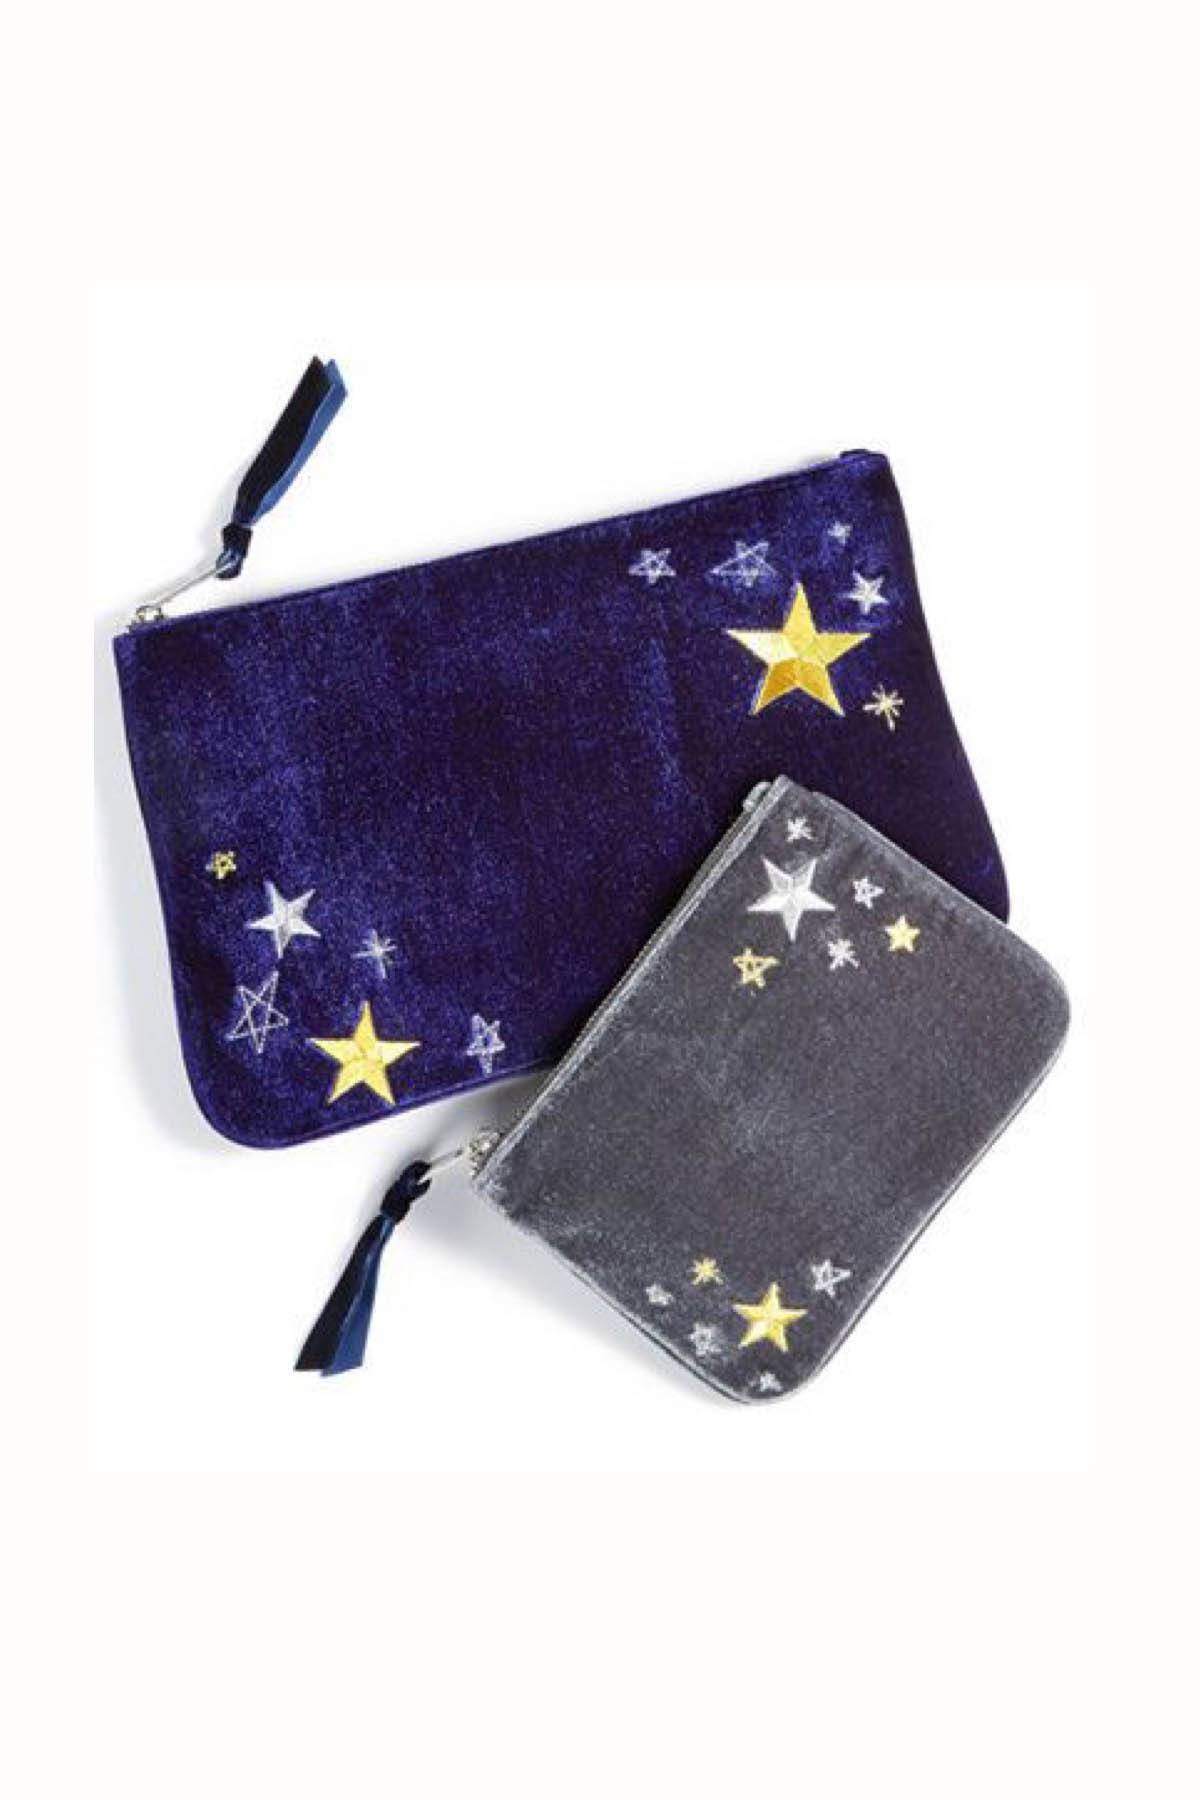 Celebrate Shop Navy/Silver Embroidered Velvet Cosmetic Pouch 2-Pack